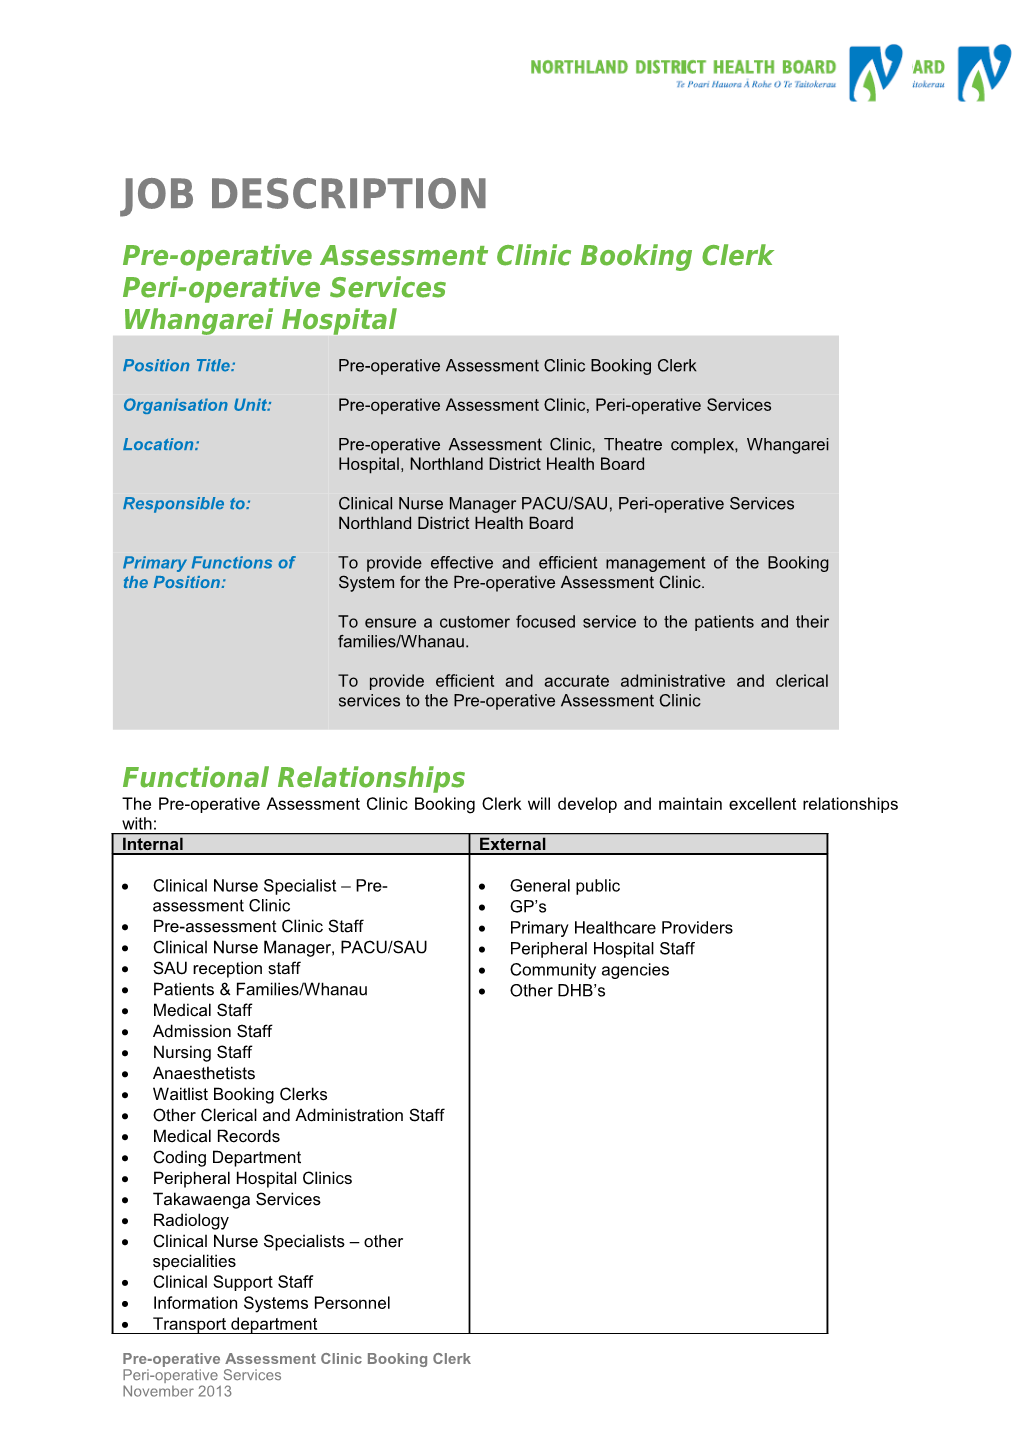 Pre-Operative Assessment Clinic Booking Clerk